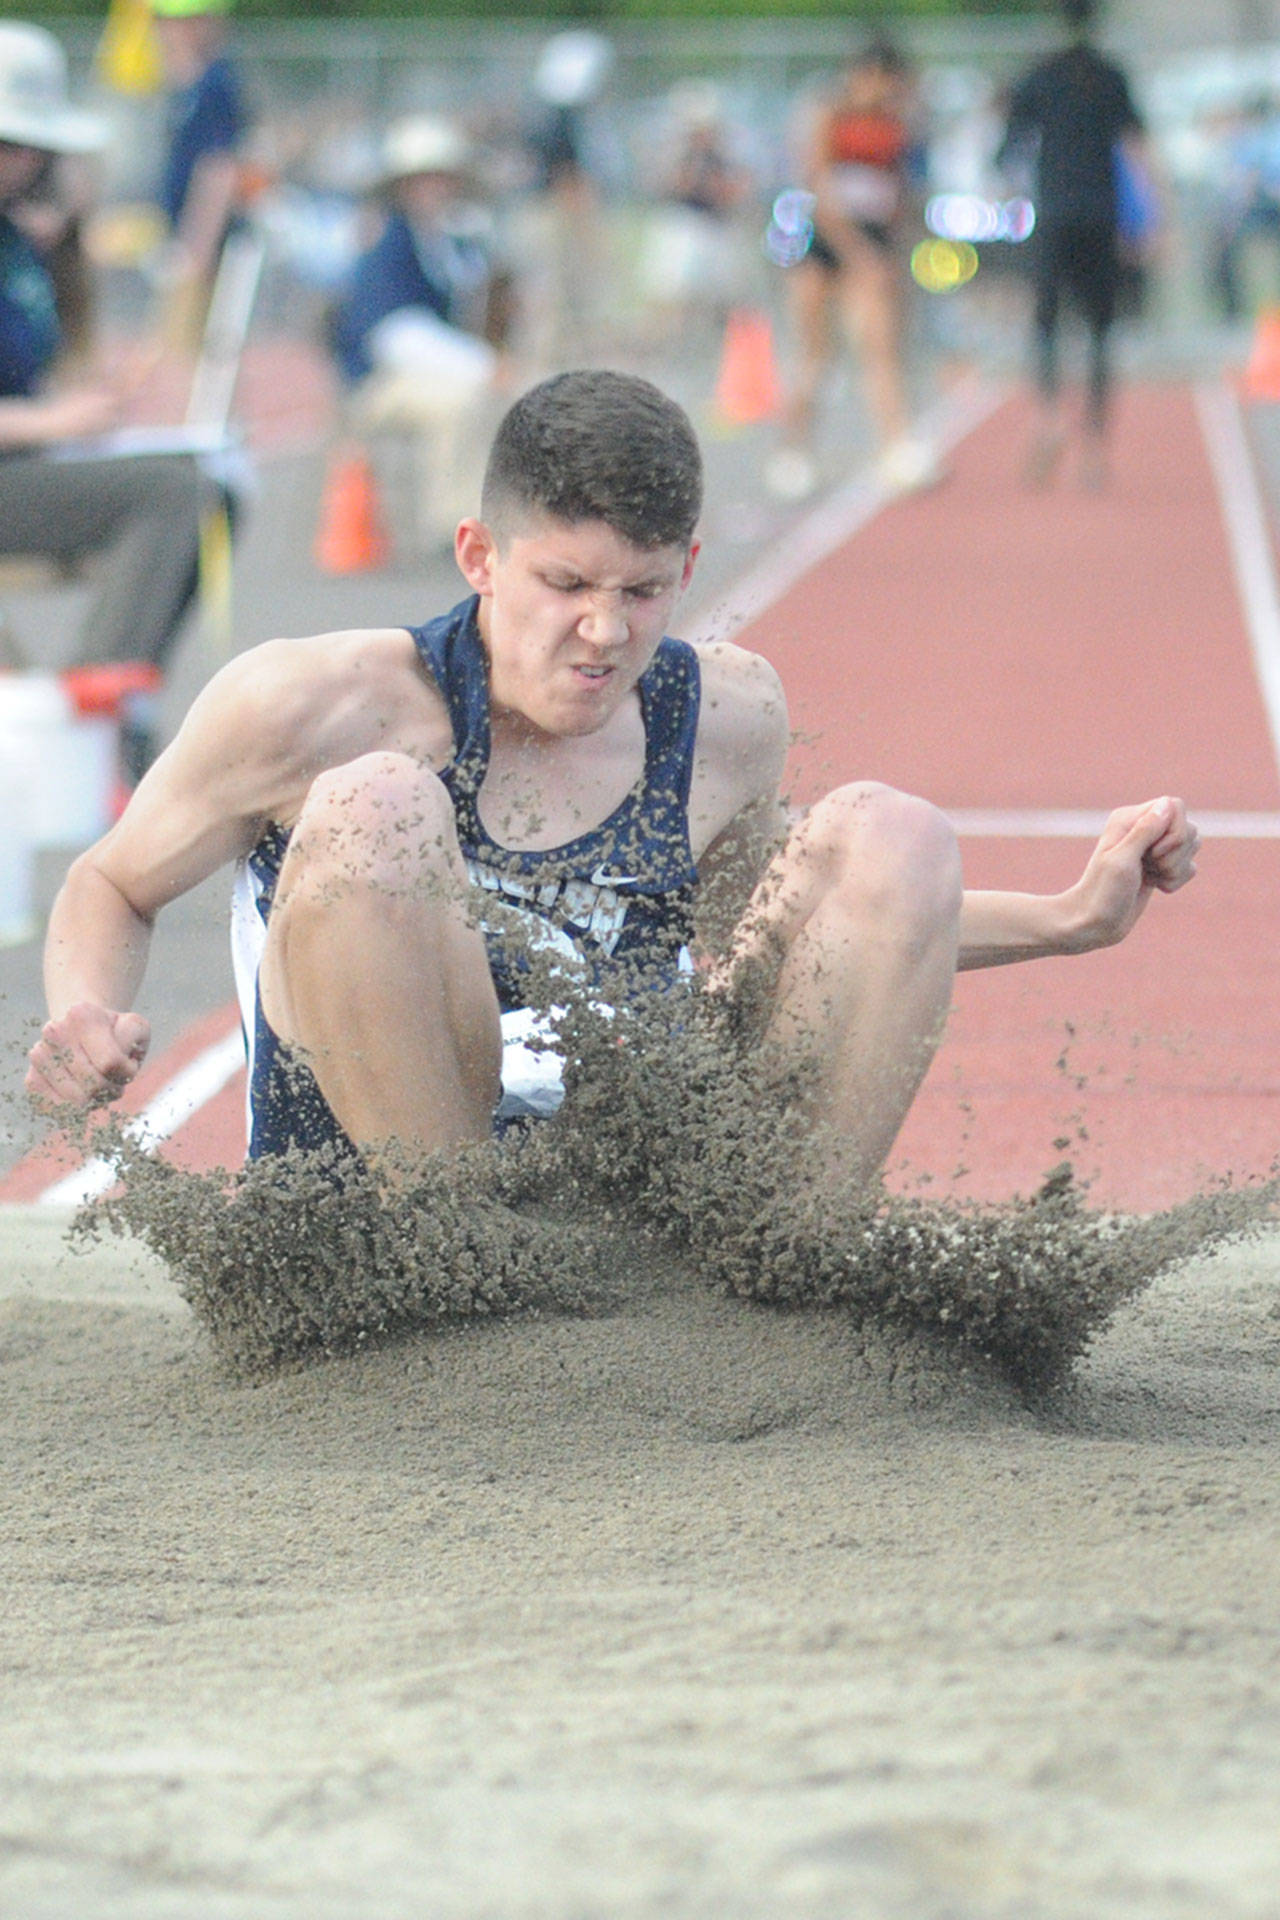 Arlington’s Parra leads locals at state 3A, 2A track meets; Lakewood softball shines at state (slide show)